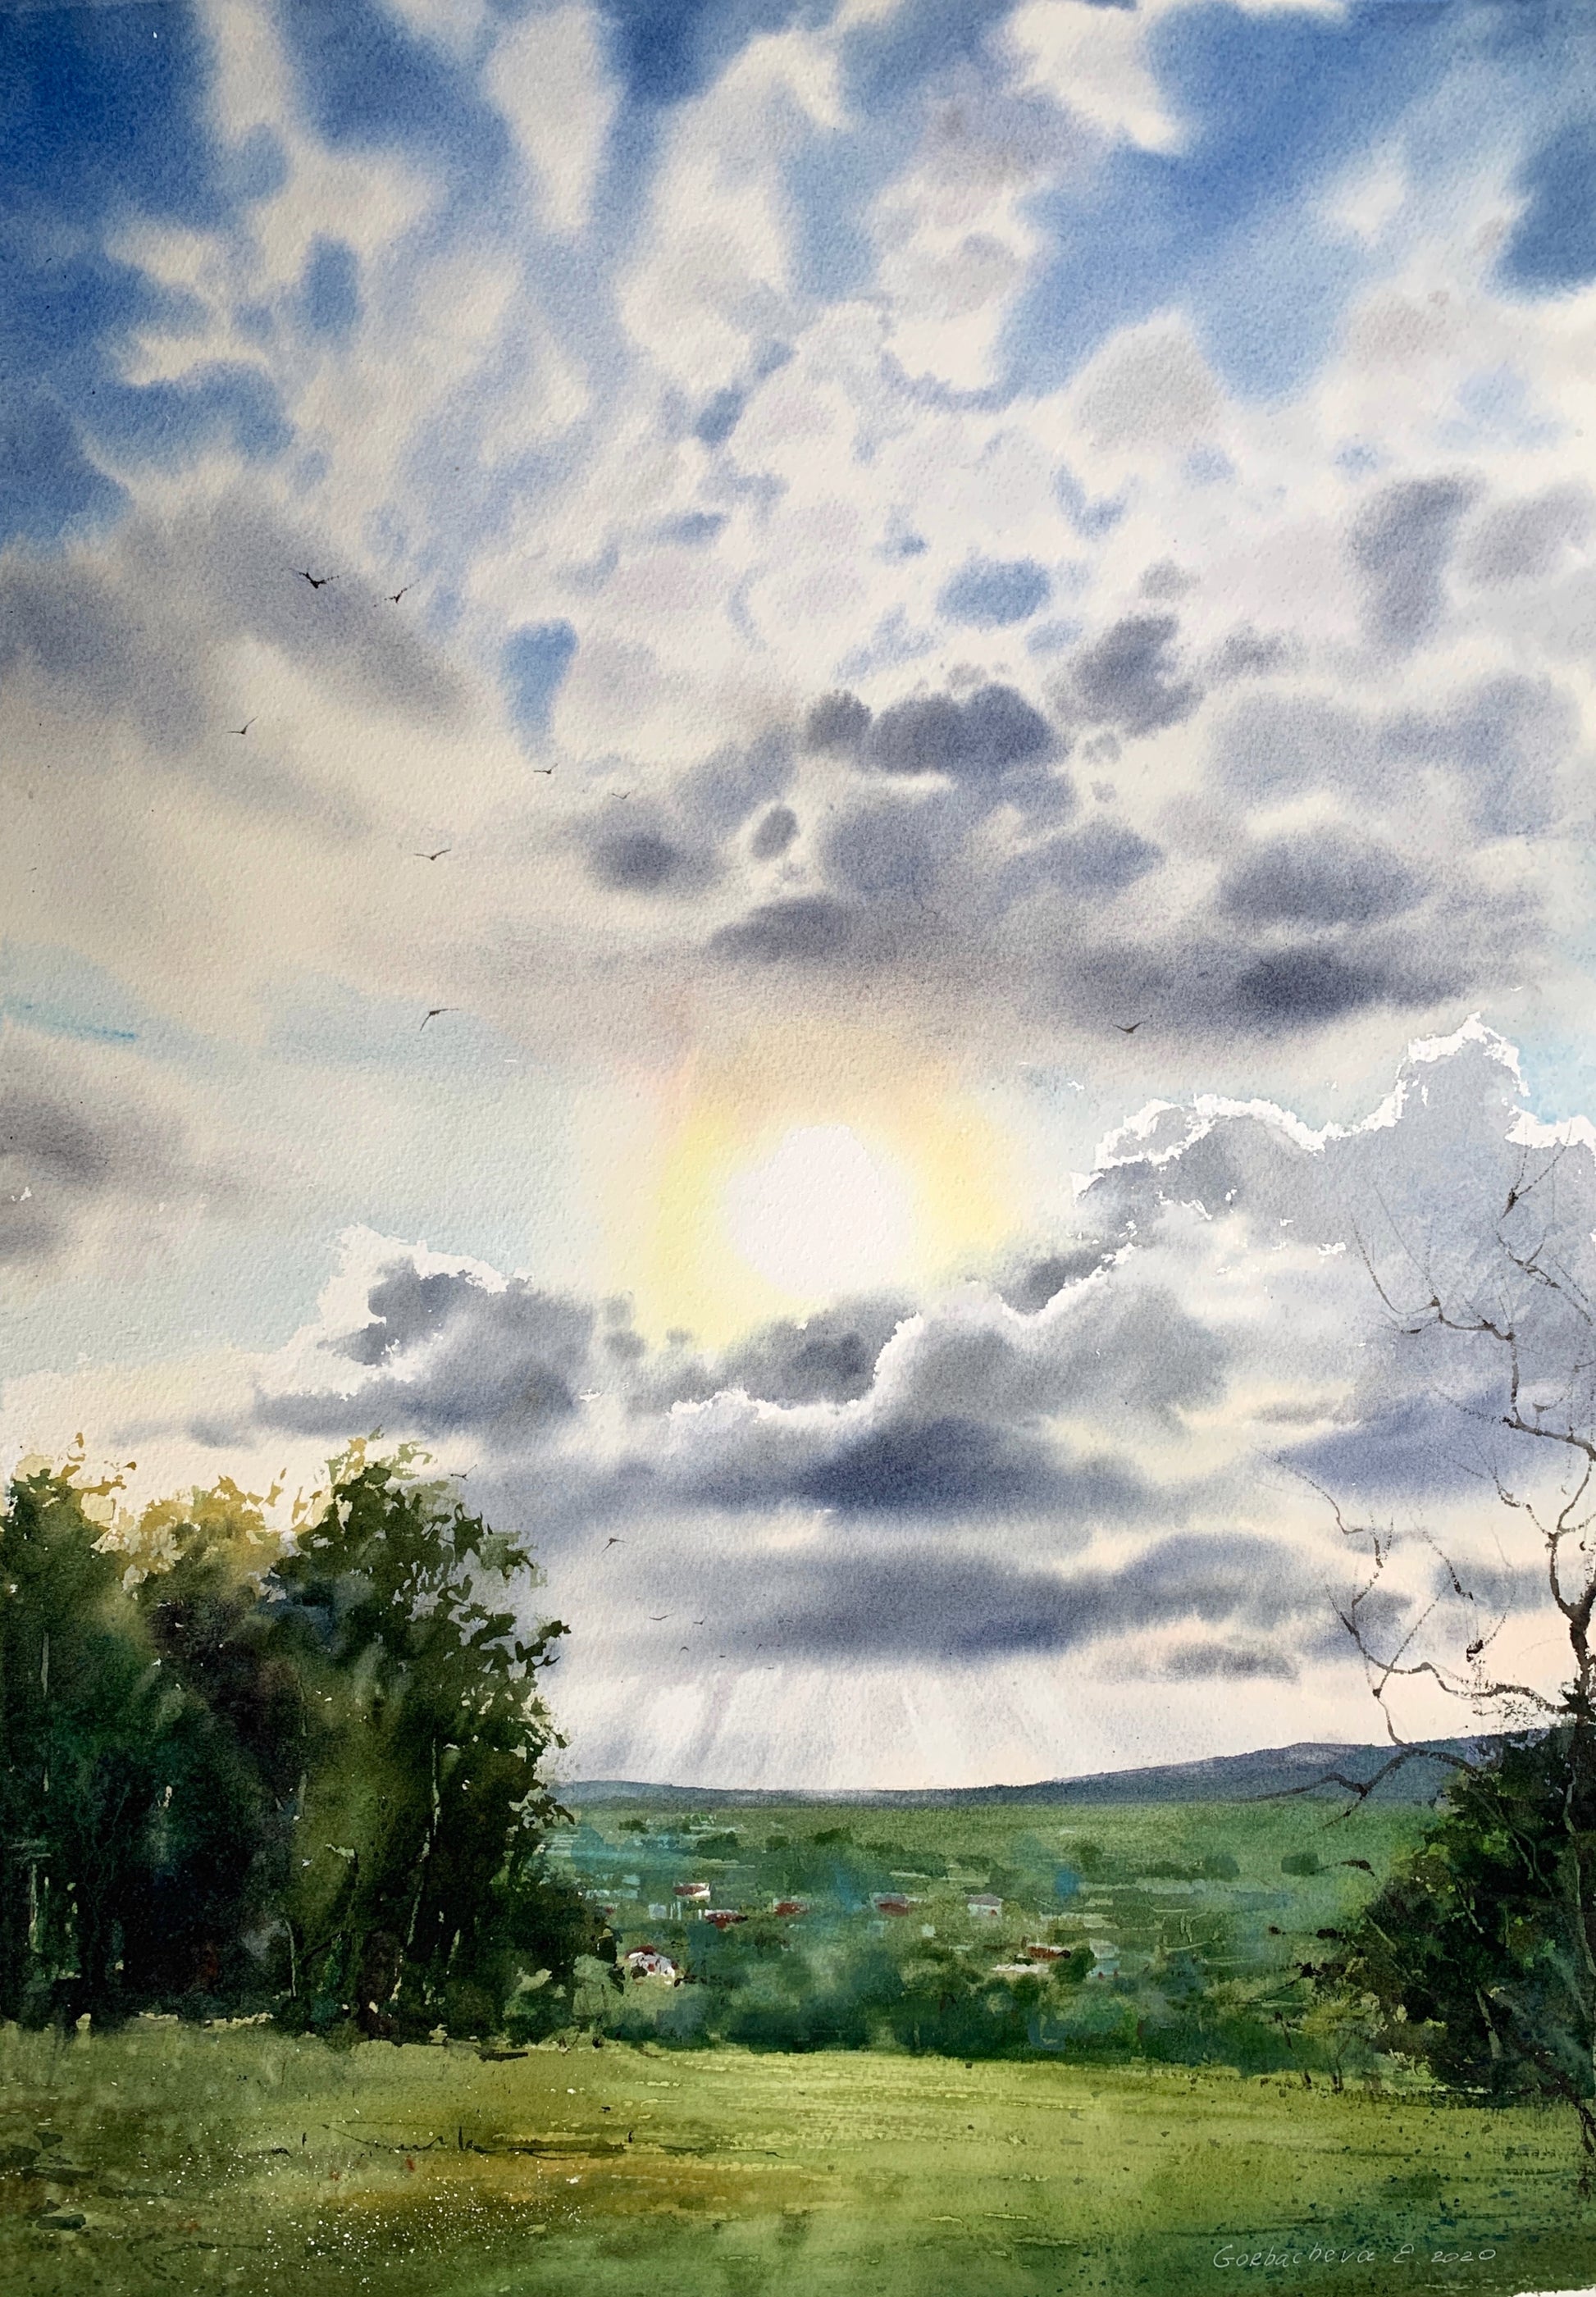 Rural Landscape Painting, Country Field Watercolor Original, Nature Art,  Sunset River Wall Decor, Cloud Sky, Gift